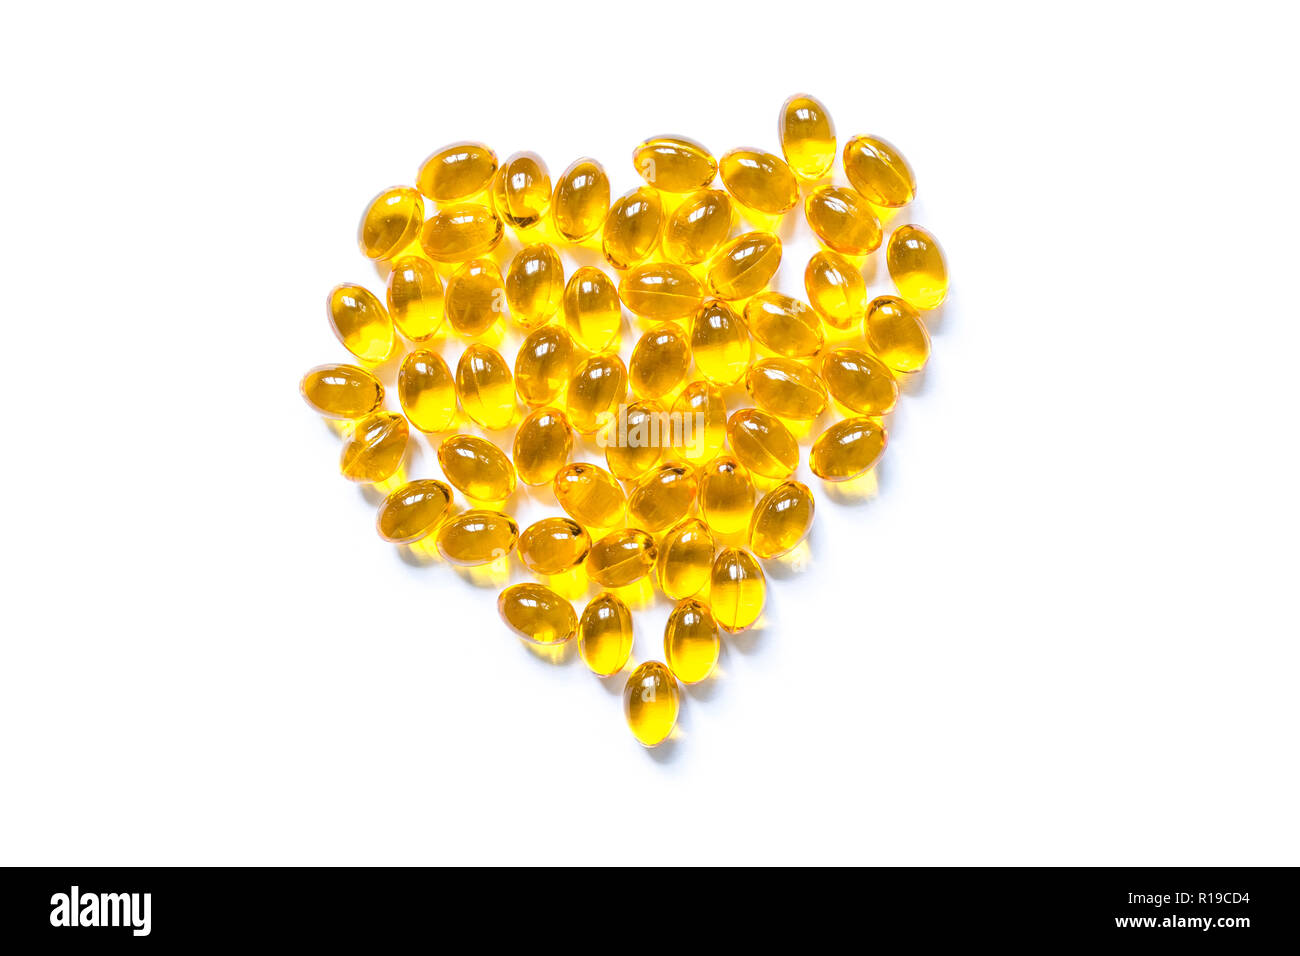 Download Fish Oil Capsule Pills Of Yellow Color In The Shape Of A Heart Closeup Isolated On White Background Stock Photo Alamy Yellowimages Mockups